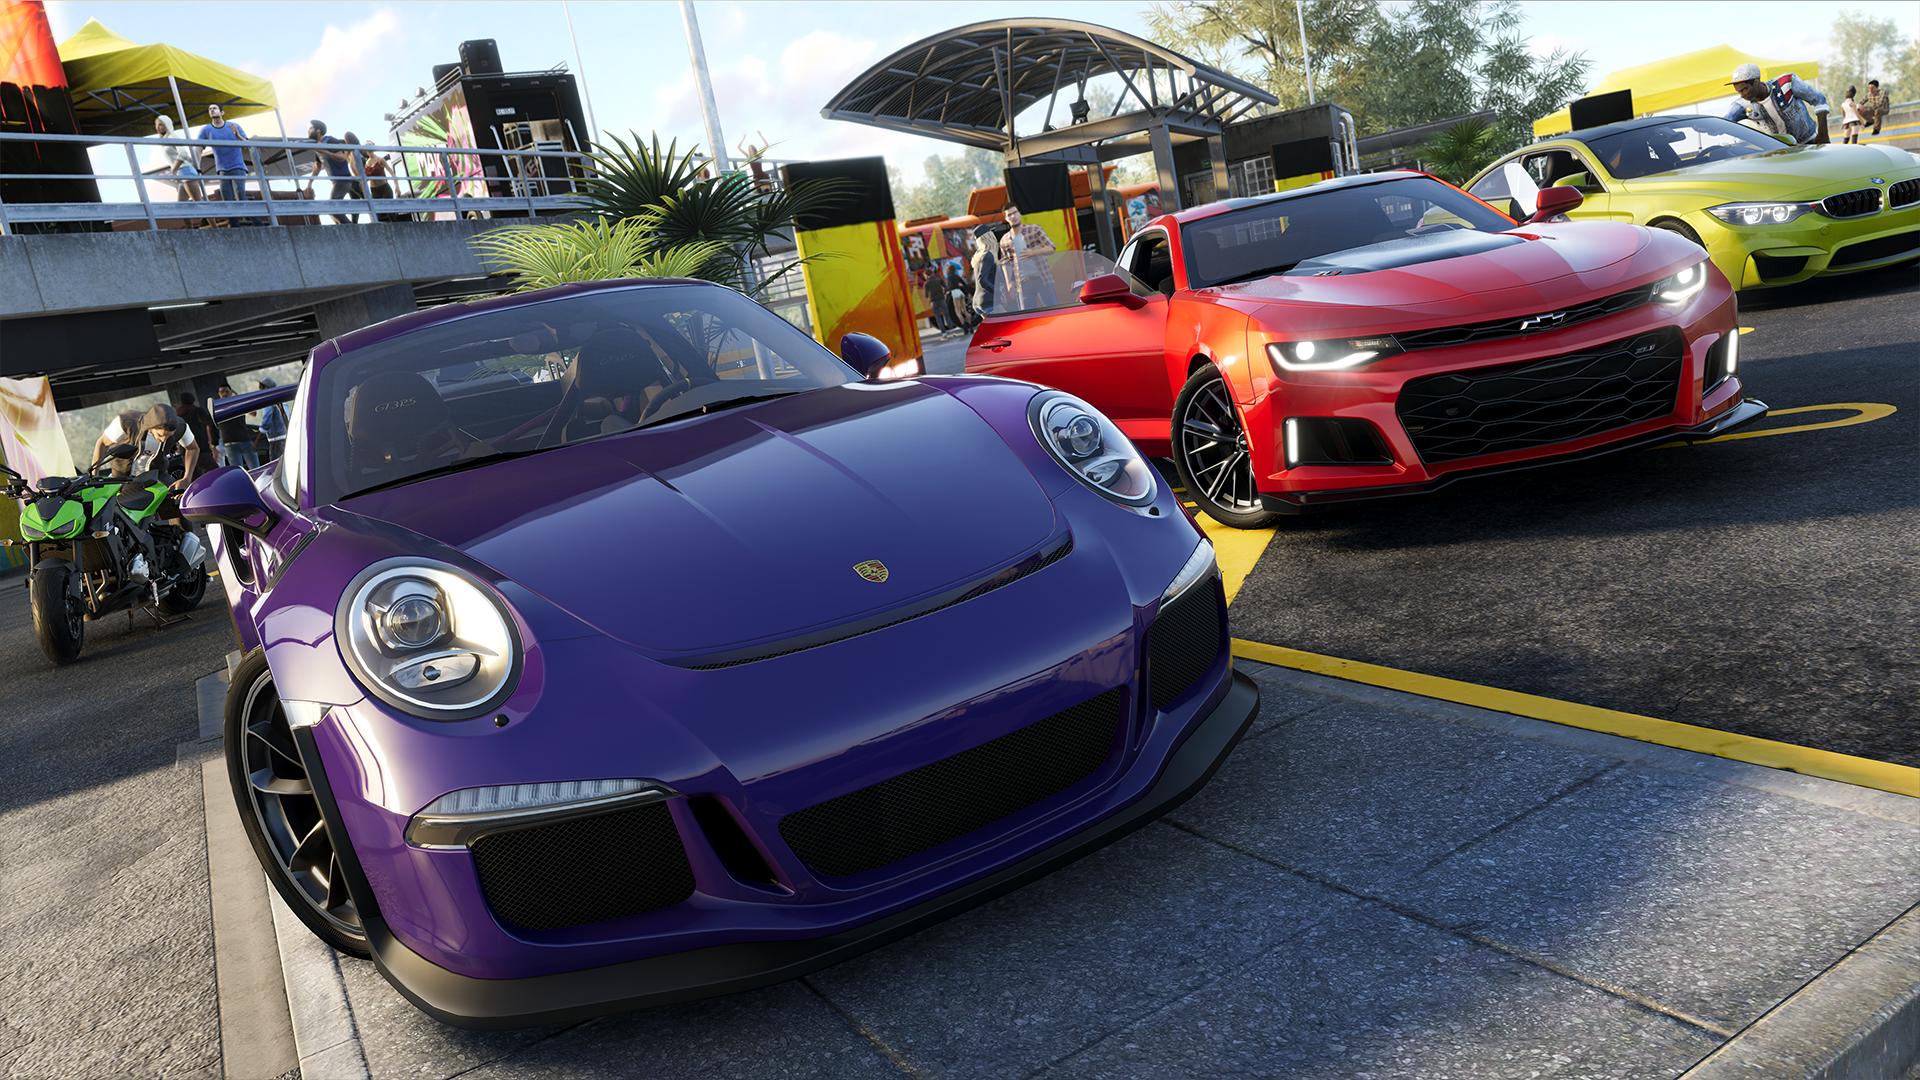 Video Game The Crew 2 HD Wallpaper | Background Image